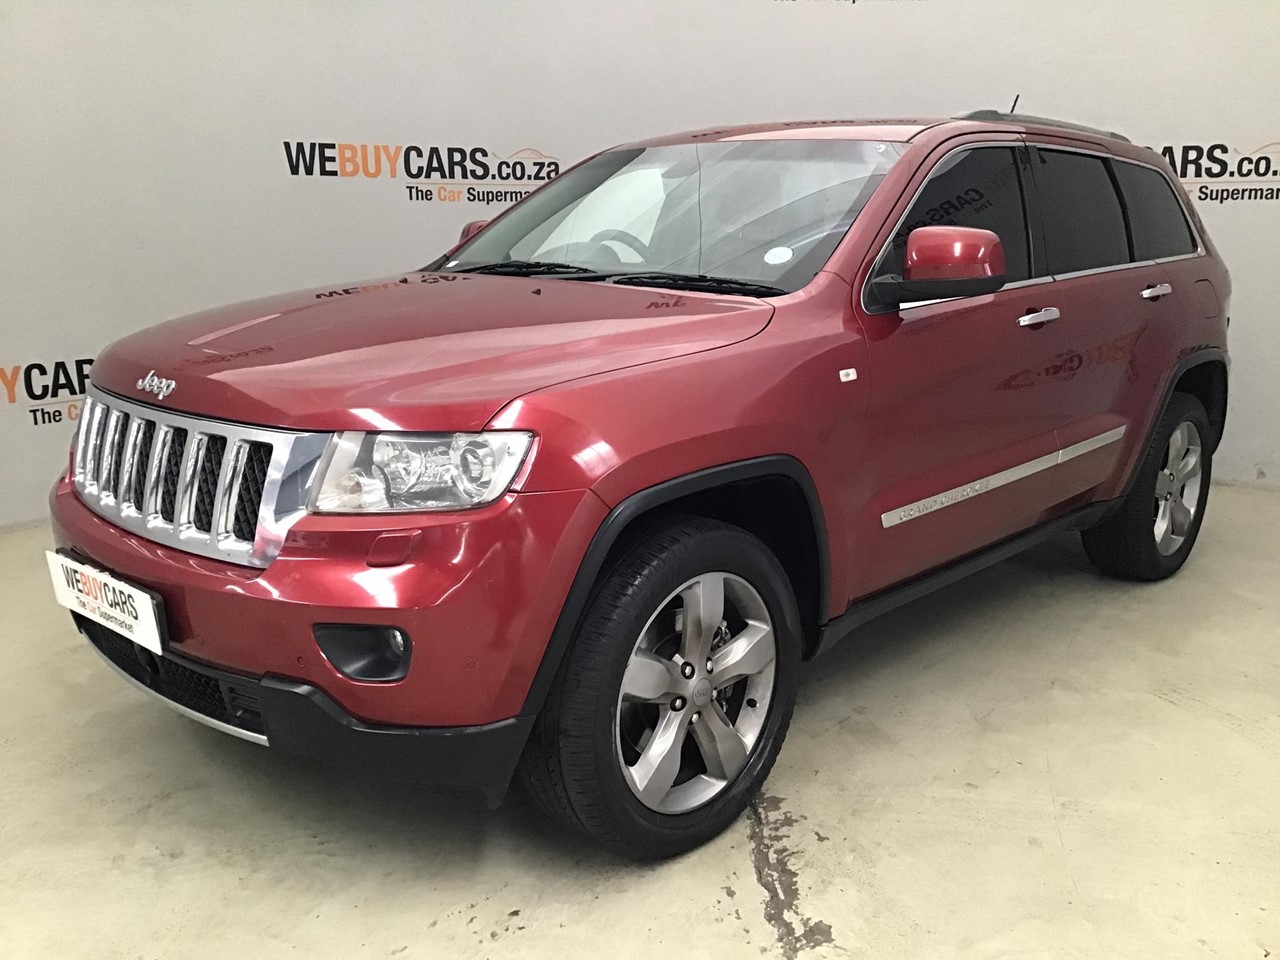 Used 2012 Jeep Grand Cherokee 3.0L V6 CRD O/land for sale